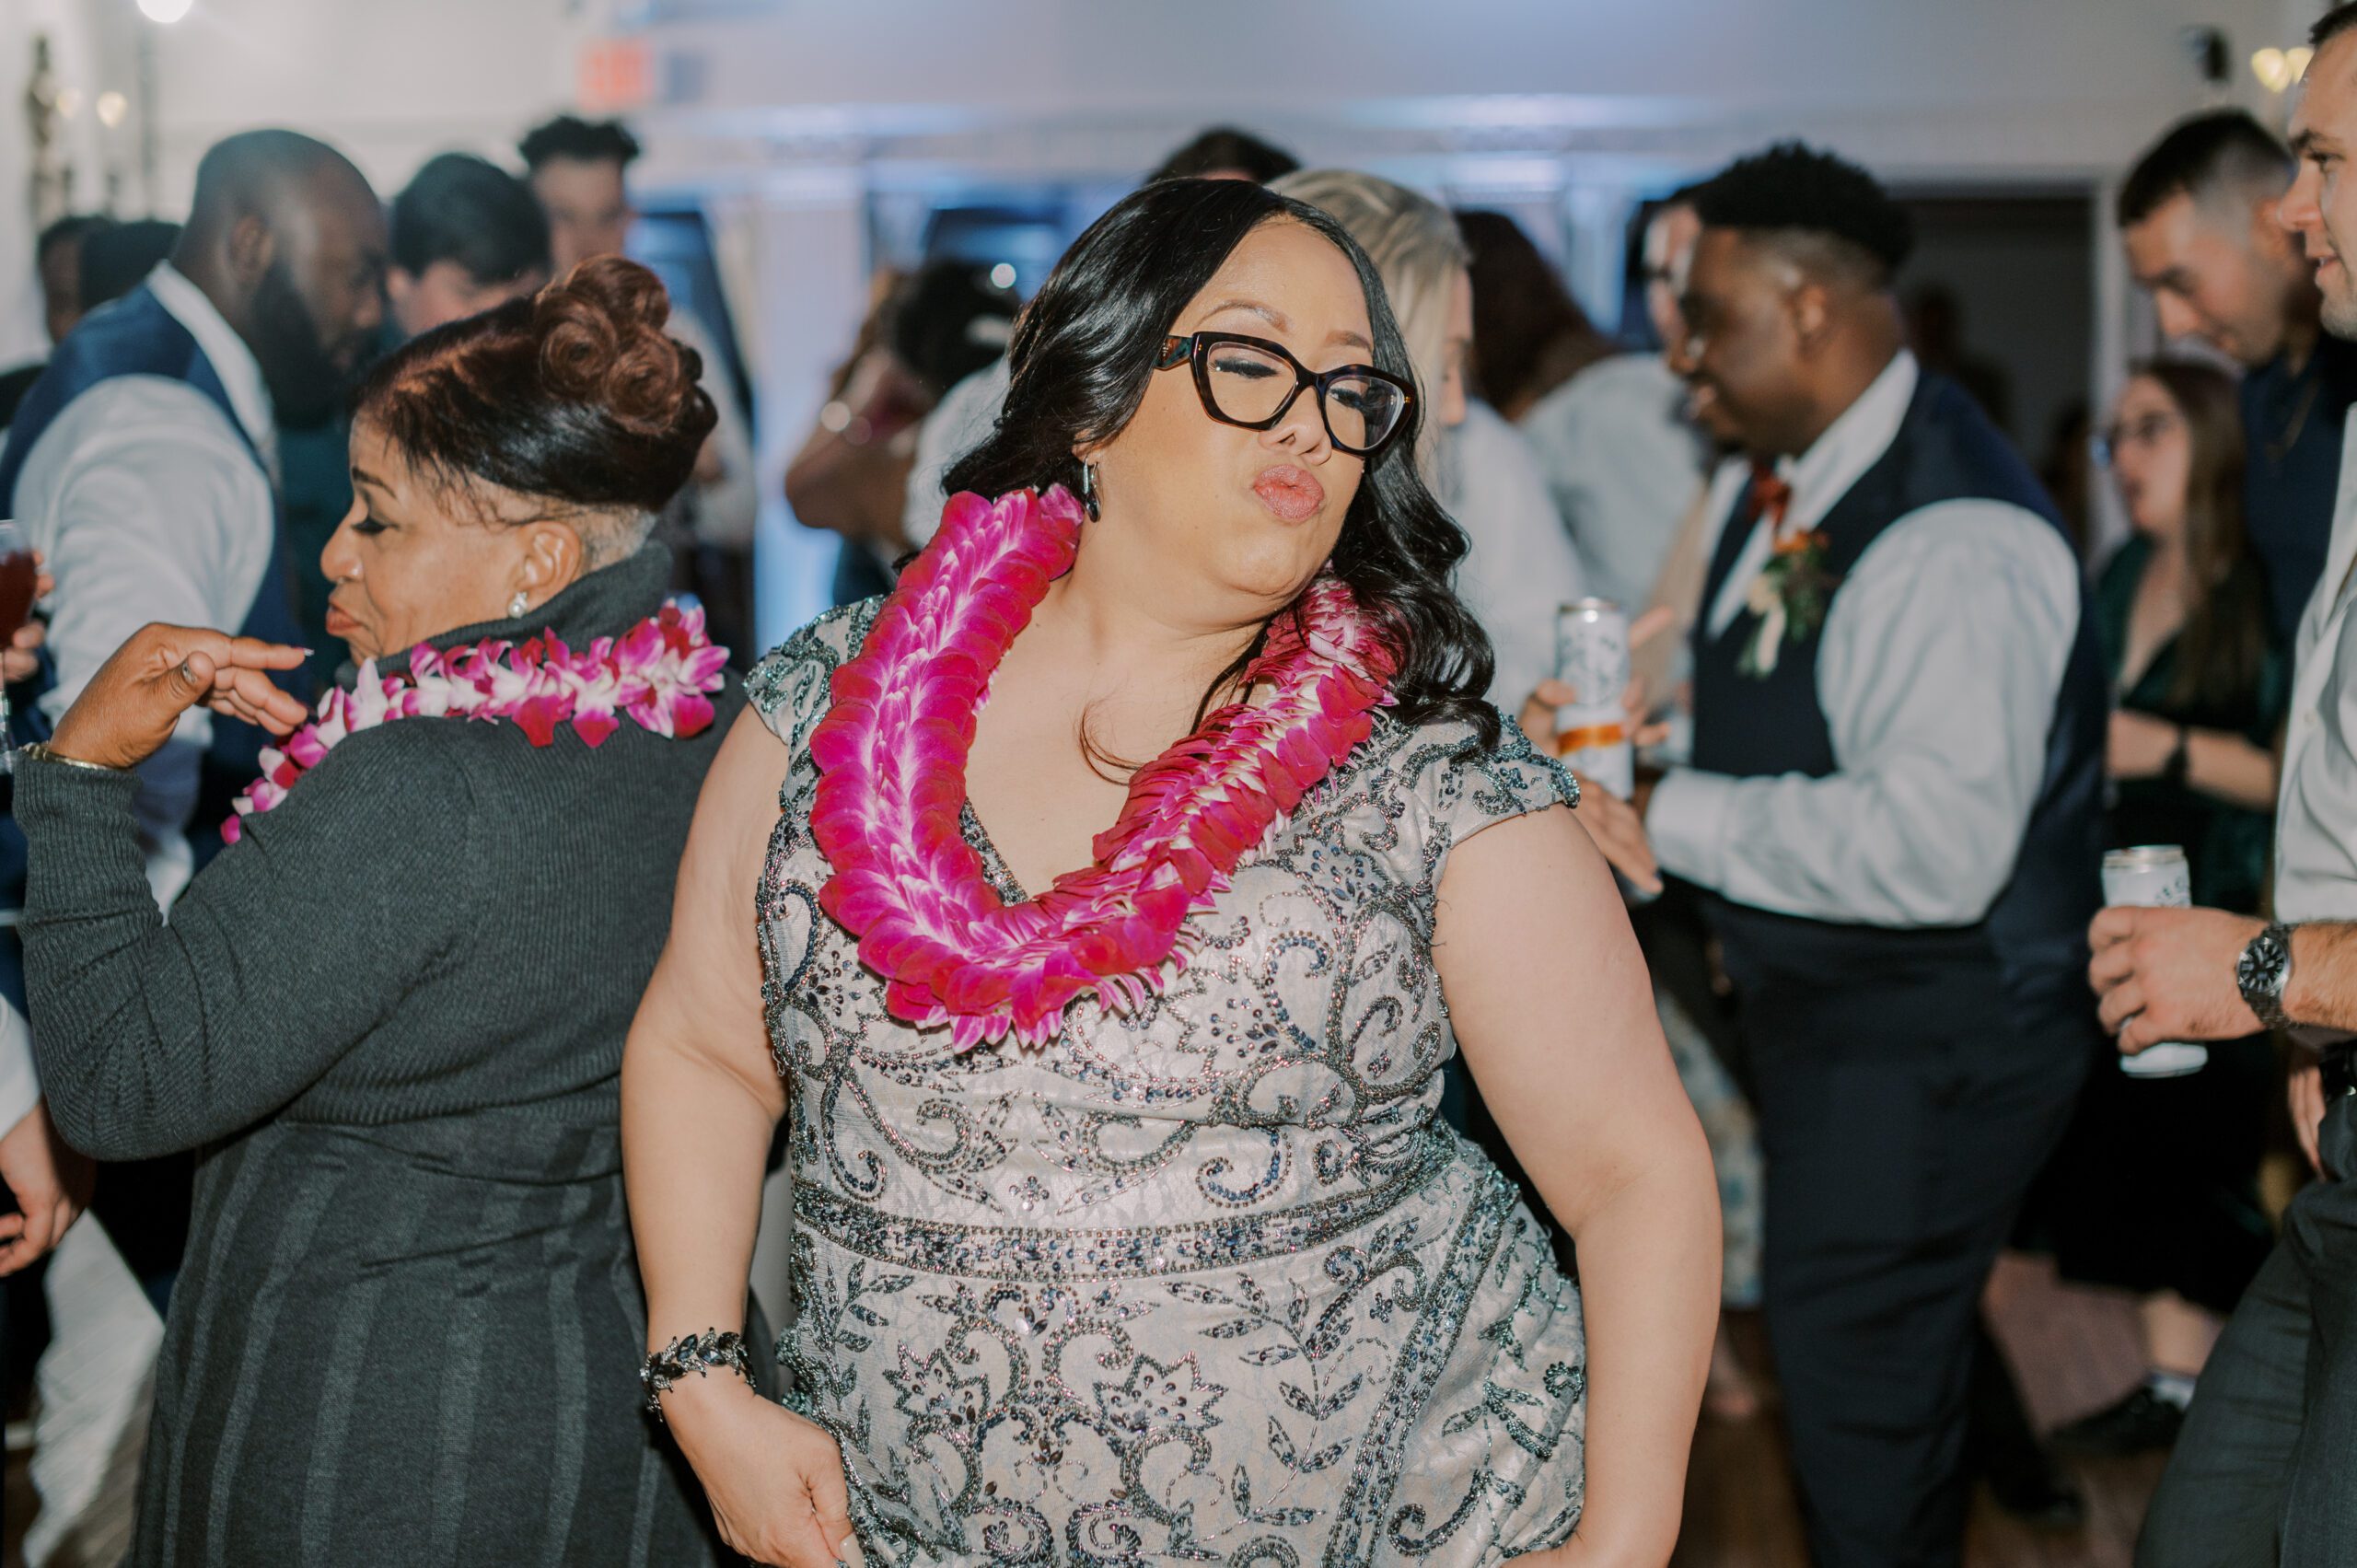 Woman on dance floor in a grey dress wearing a pink lei at the manor at airmont